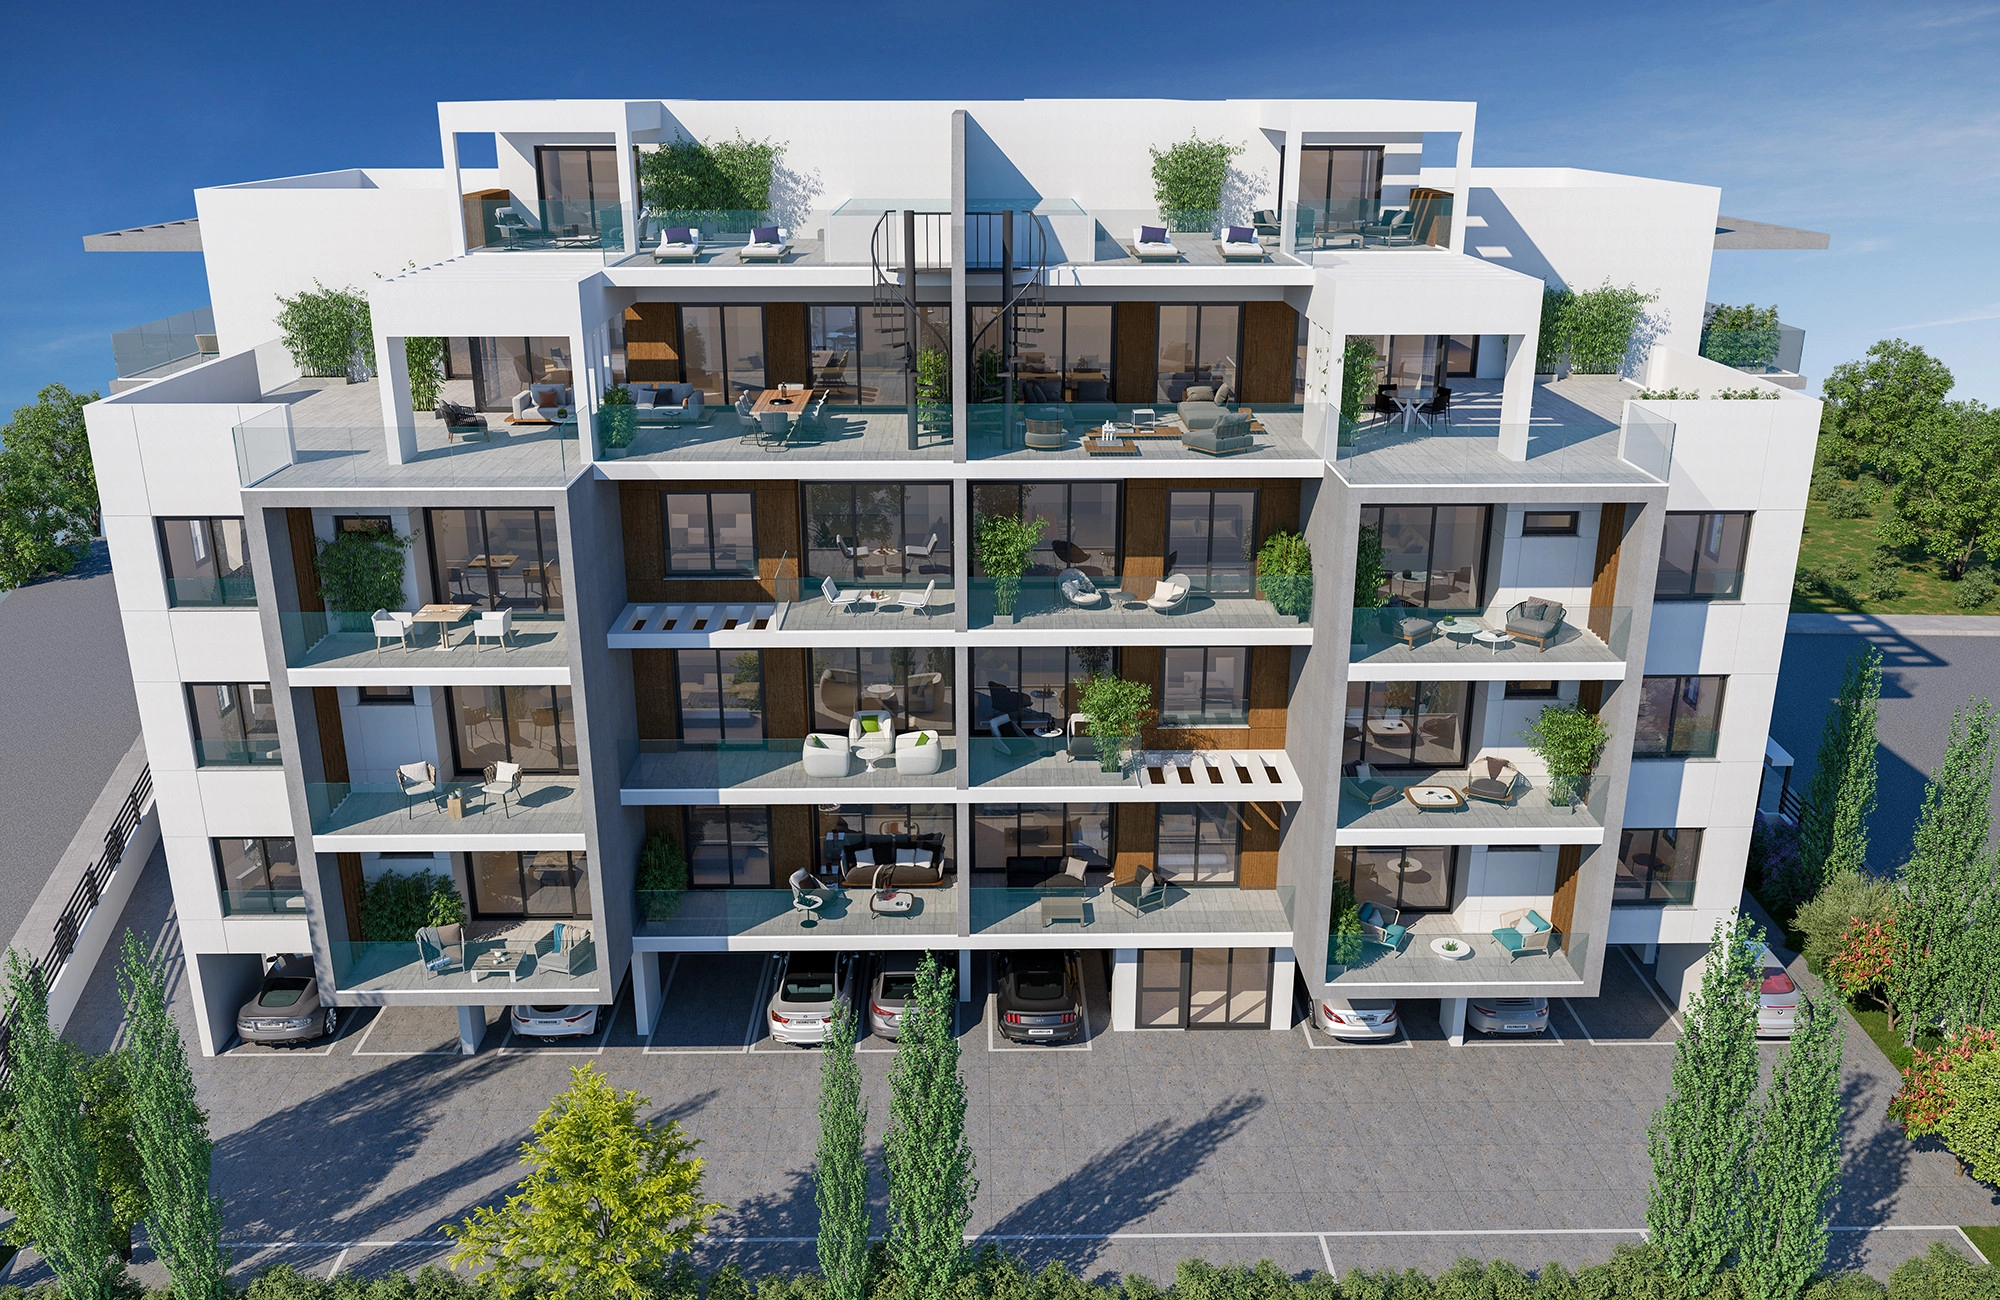 5 Bedroom Apartment for Sale in Limassol – Agios Athanasios